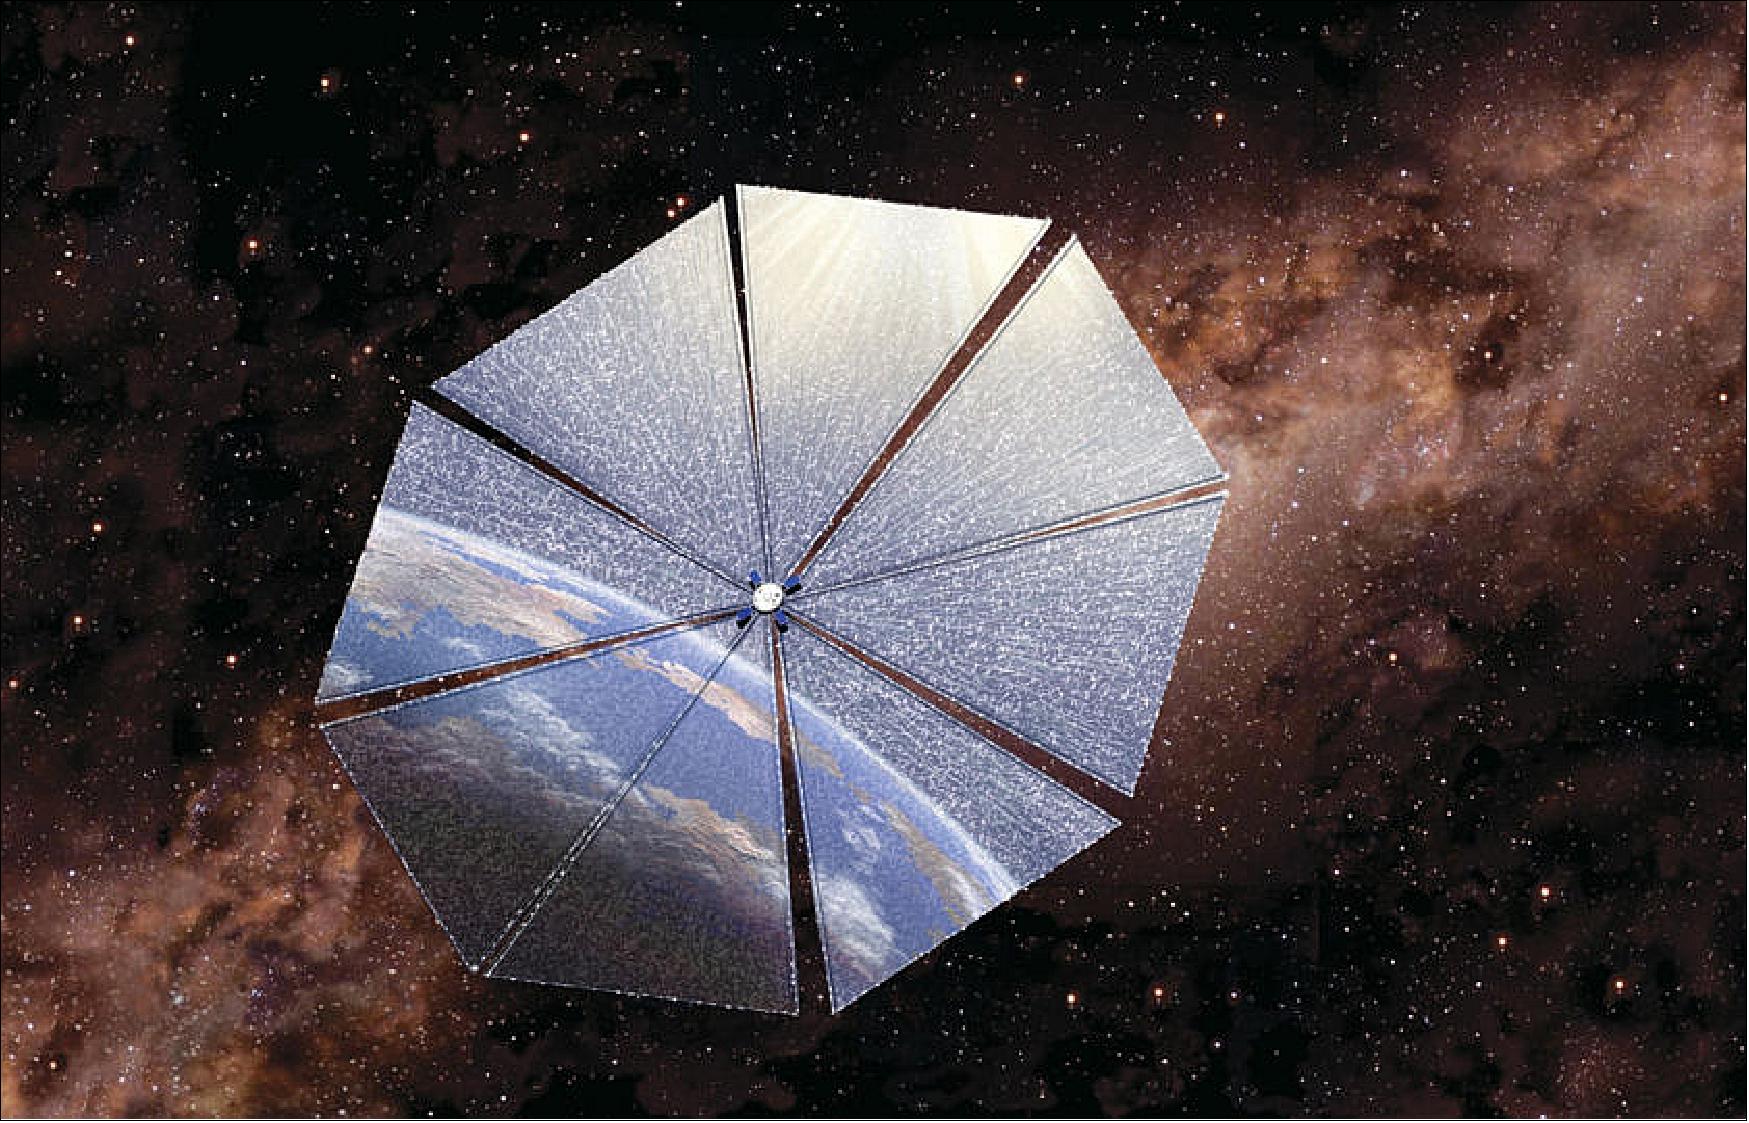 Figure 1: Cosmos 1, The Planetary Society's first solar sail, was lost due to a Russian rocket failure in 2005 (image credit: The Planetary Society)